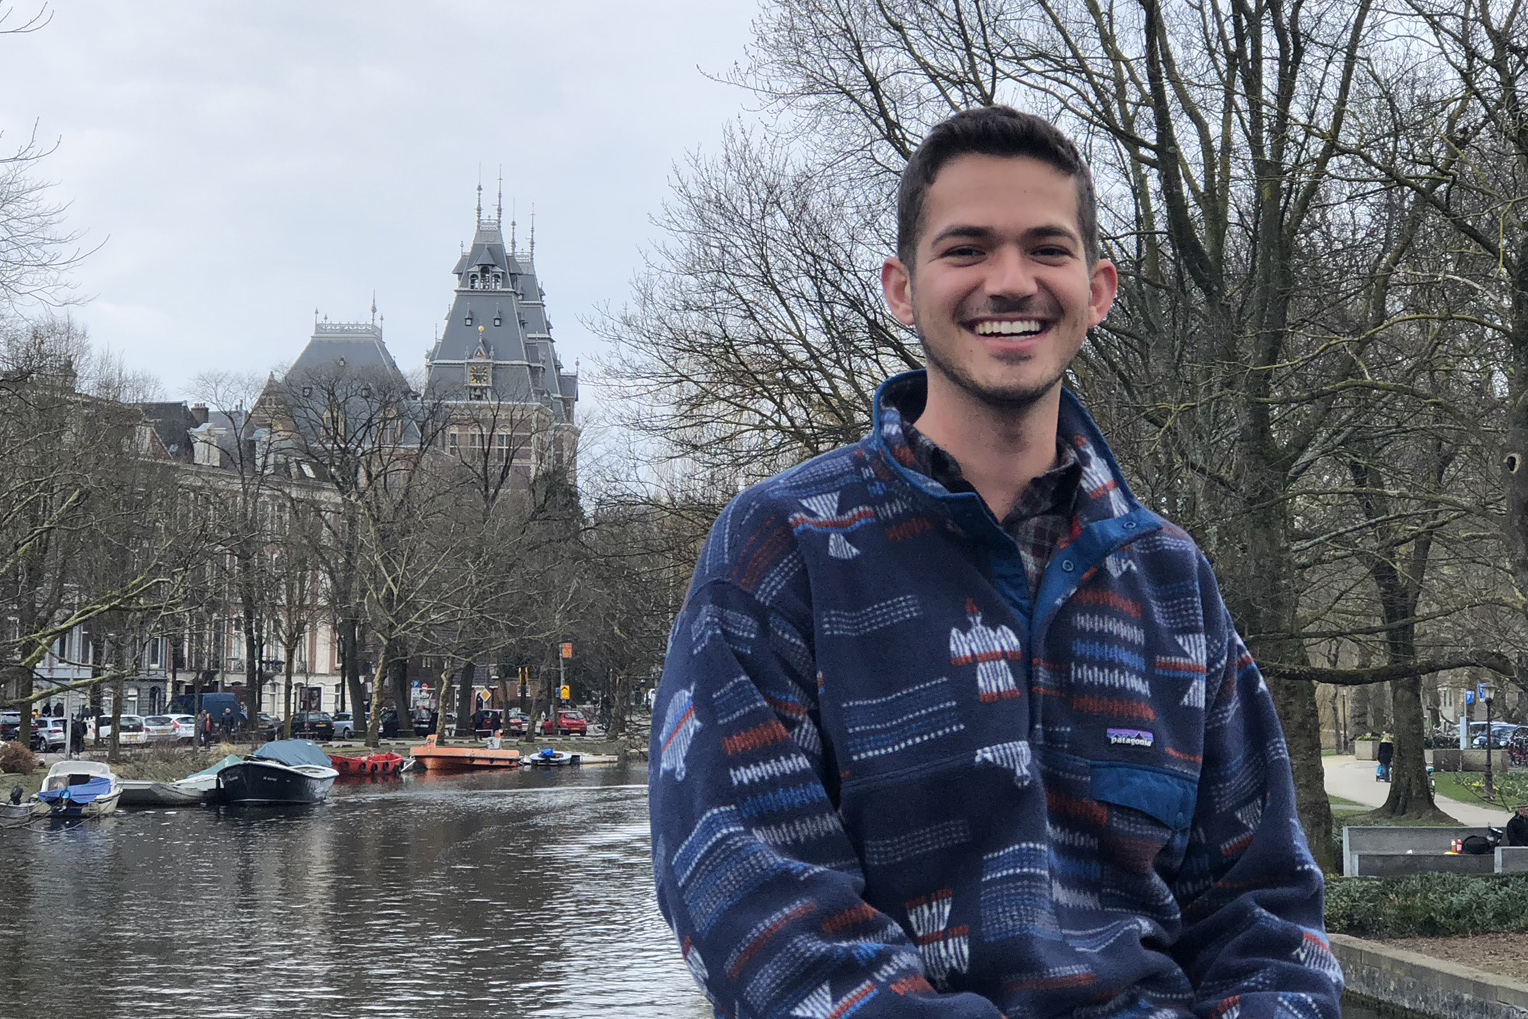 Mark Borges smiles while sitting in front of a river in Amsterdam